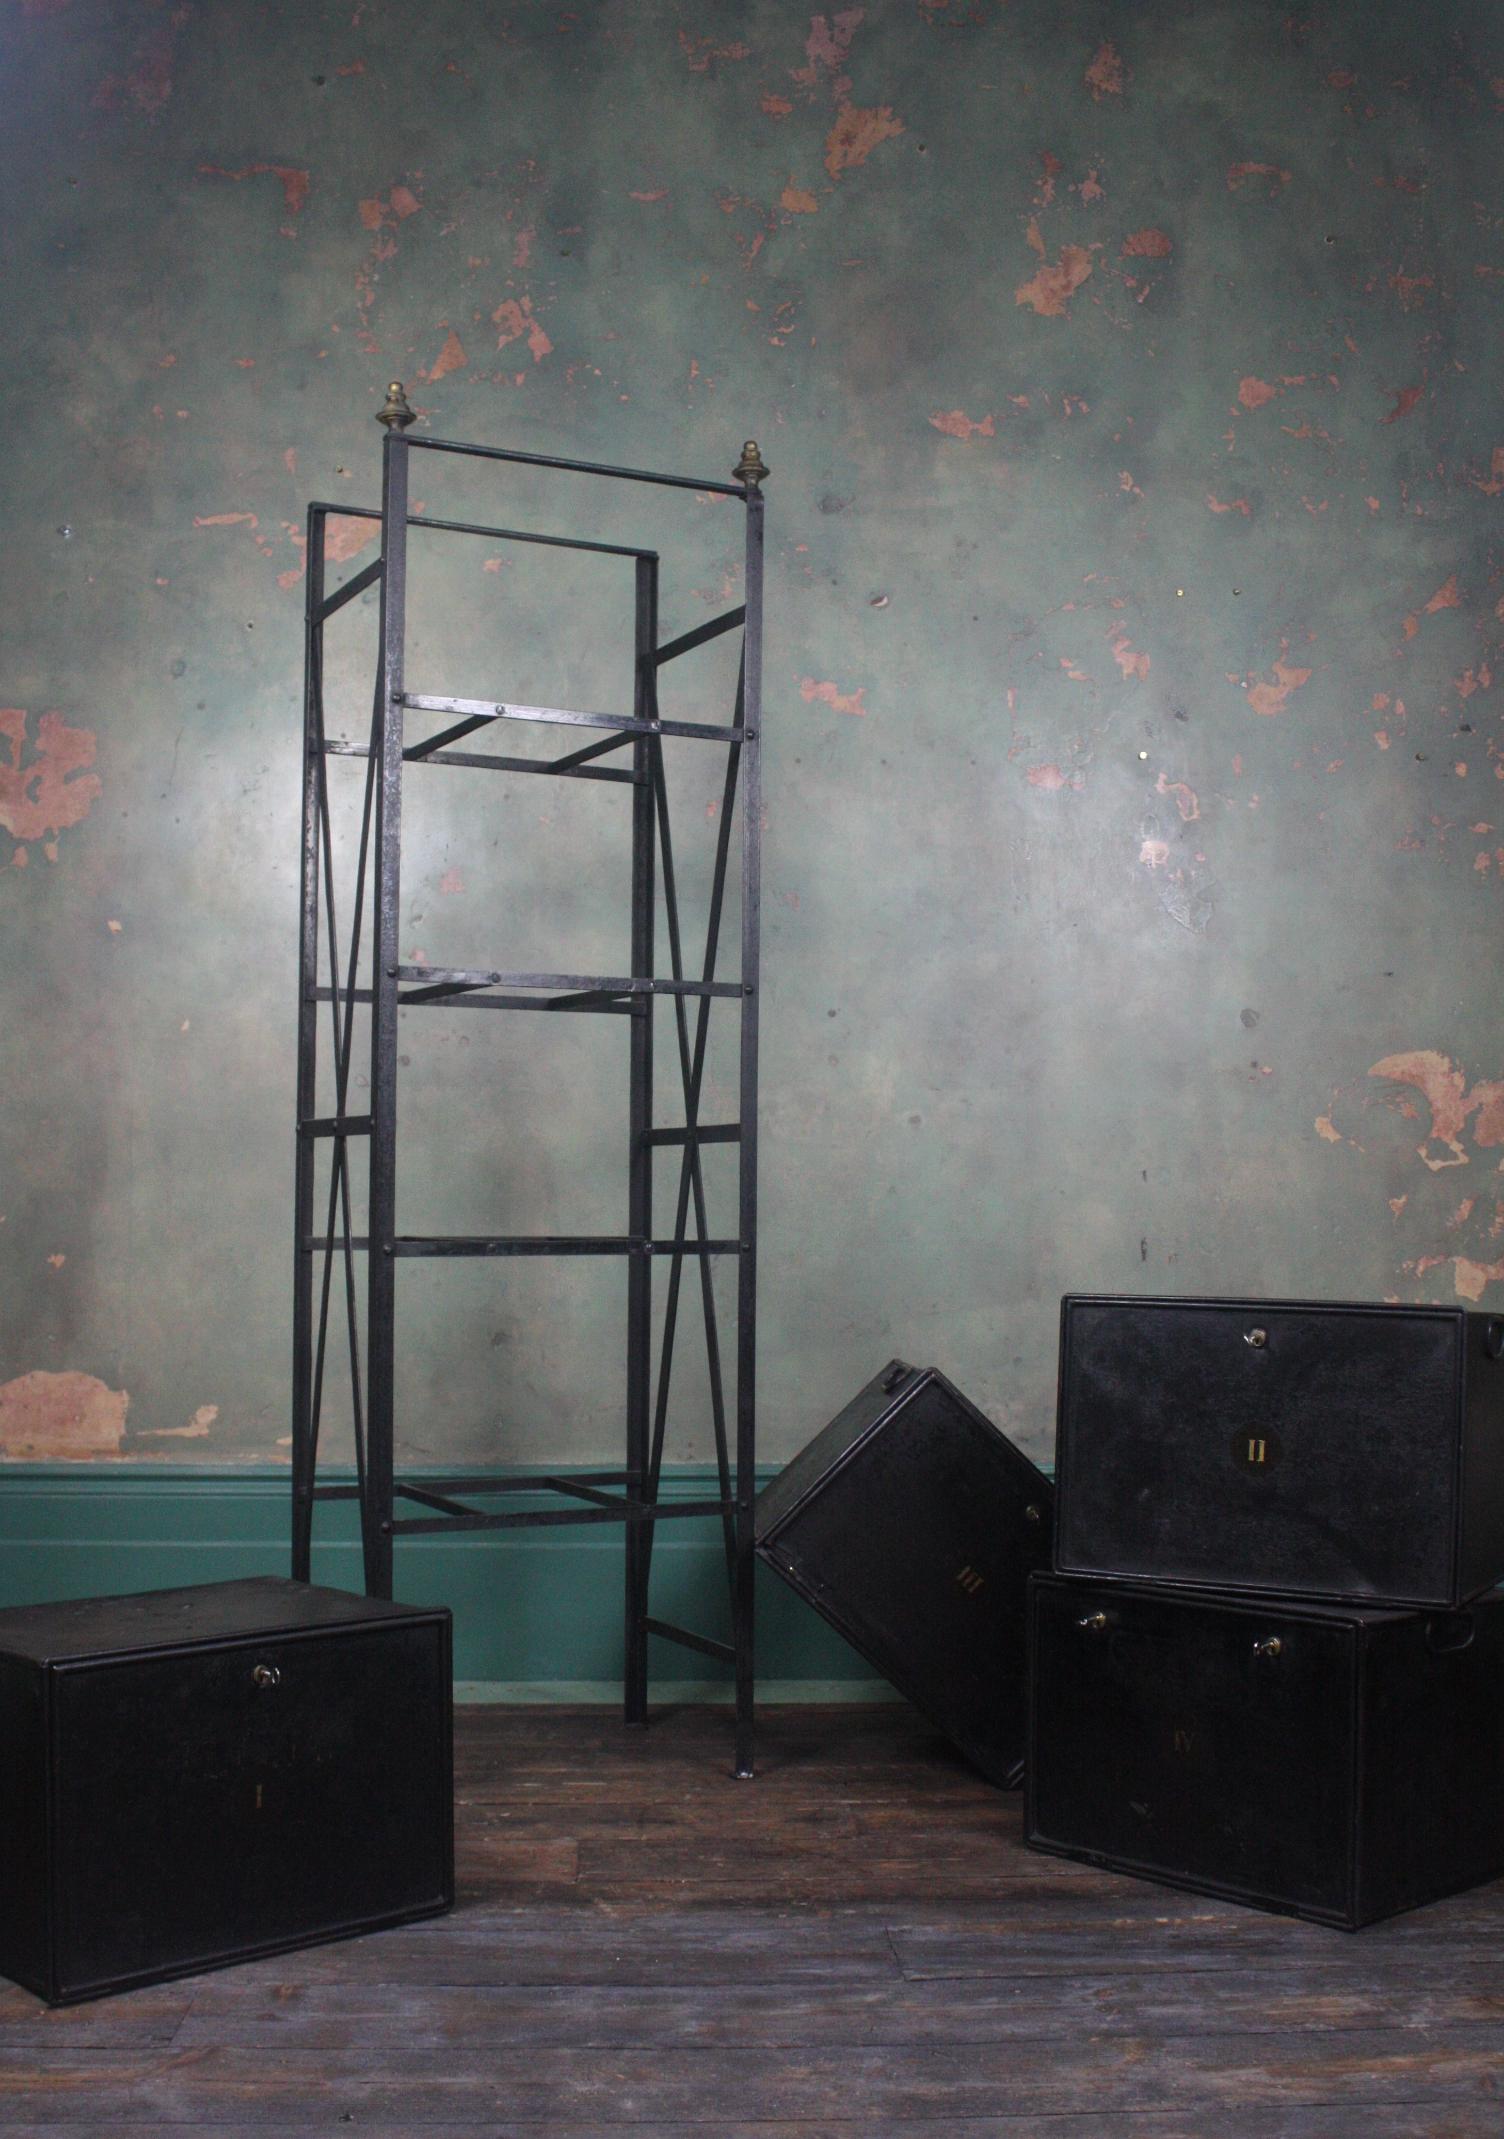 A mid-19th century deed rack with original boxes 

The rack is made from wrought iron and riveted with black enameled boxes that open 

This would of been housed in a solicitors, each box in numbered with earlier traces of original names and